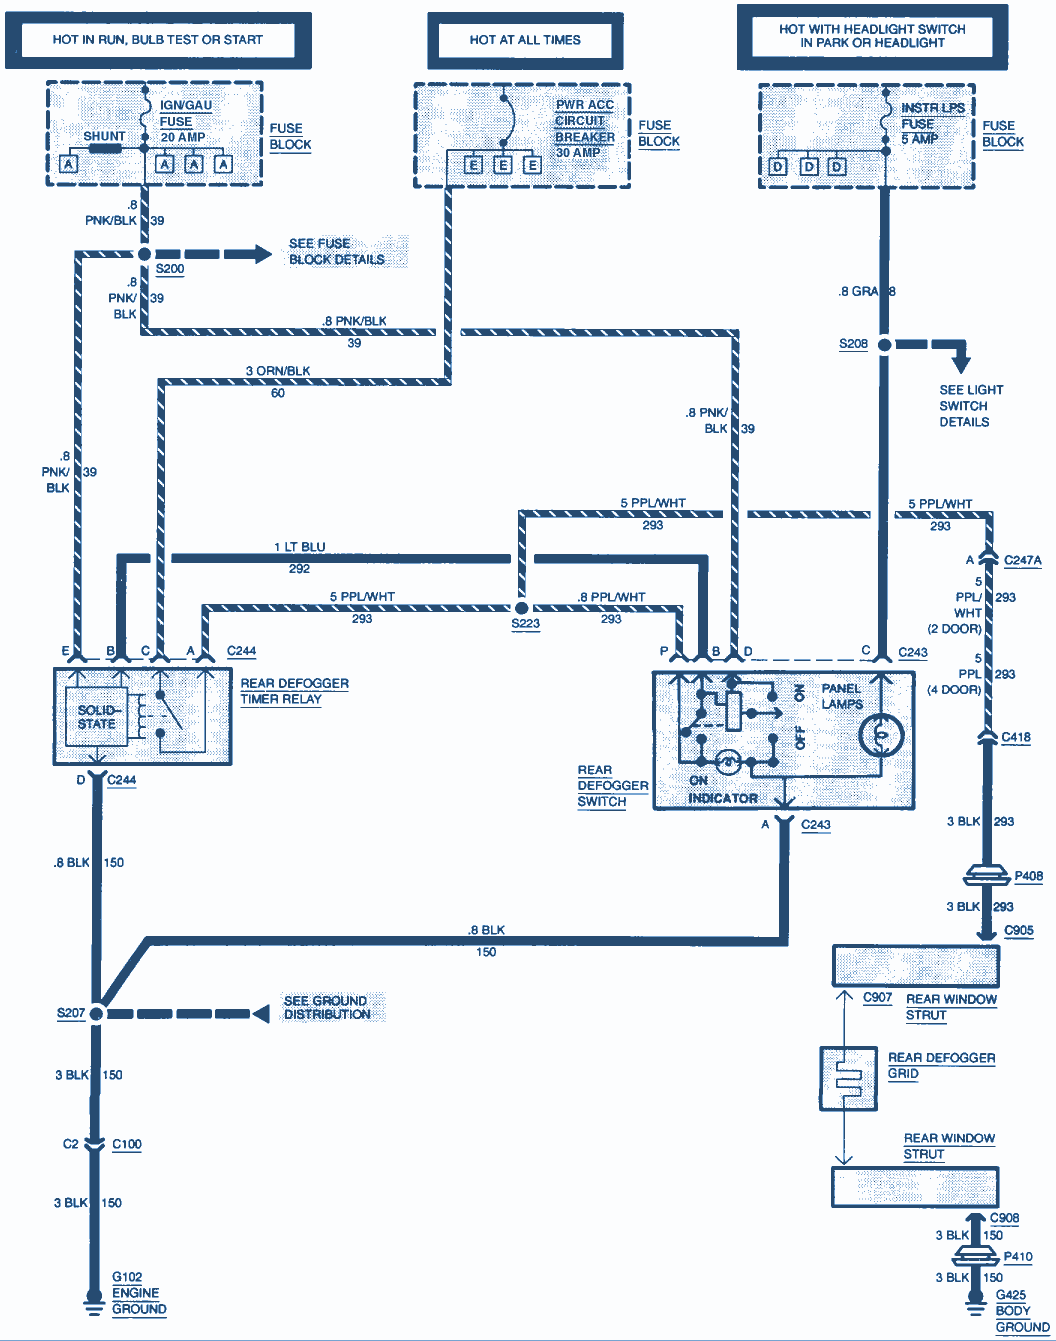 Ignition Switch Wiring Diagram 1998 Chevy S10 2.2 from 3.bp.blogspot.com